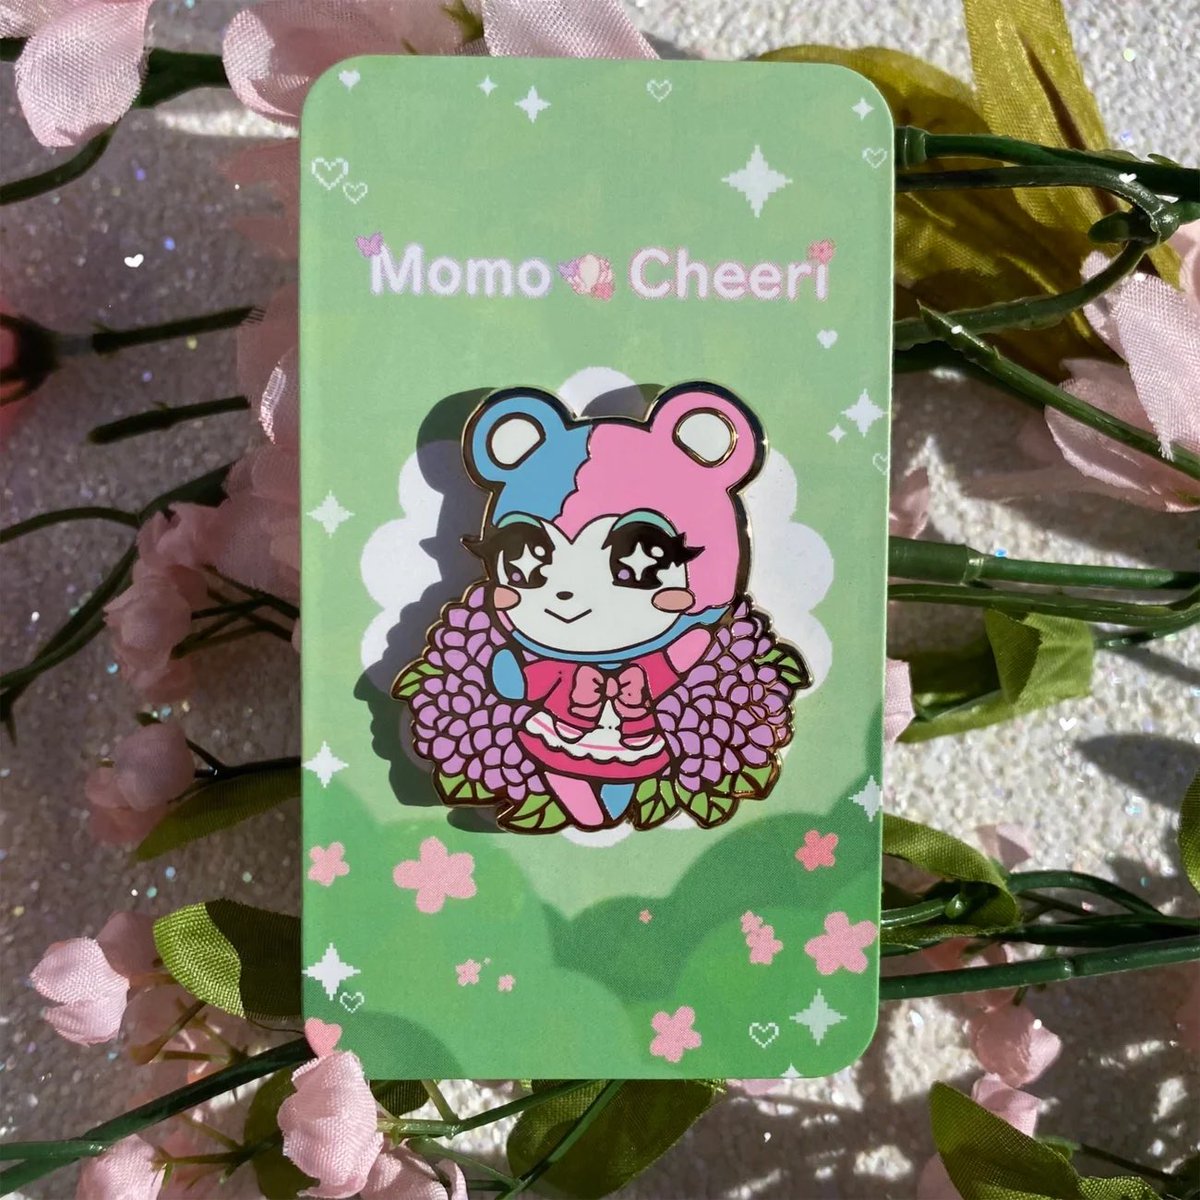 @Kiricheeri Link to Shop! https://t.co/WTOstgzcmi
i sell 9 adorable villagers check it out!
i also have a march pin club coming up, check it out or dm me for more info! ;D 